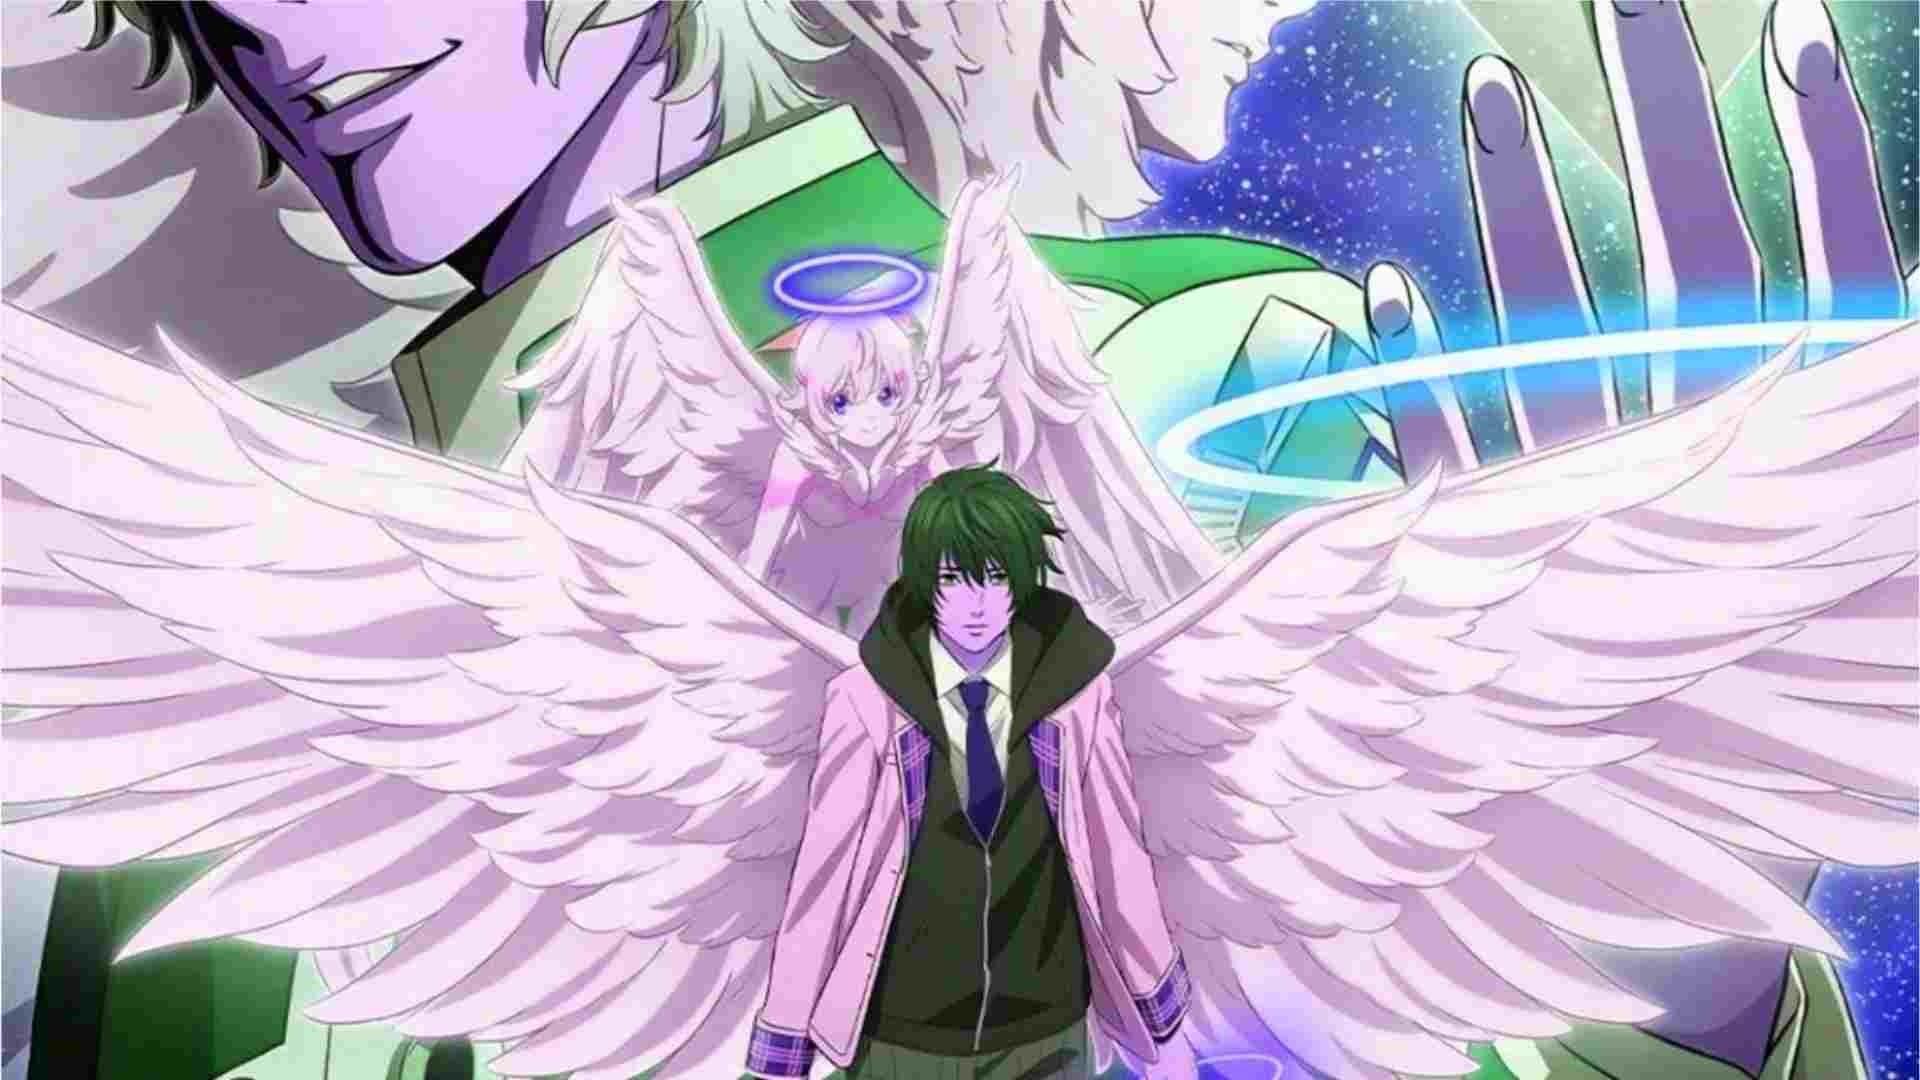 Platinum End Parents Guide and age age rating | 2021